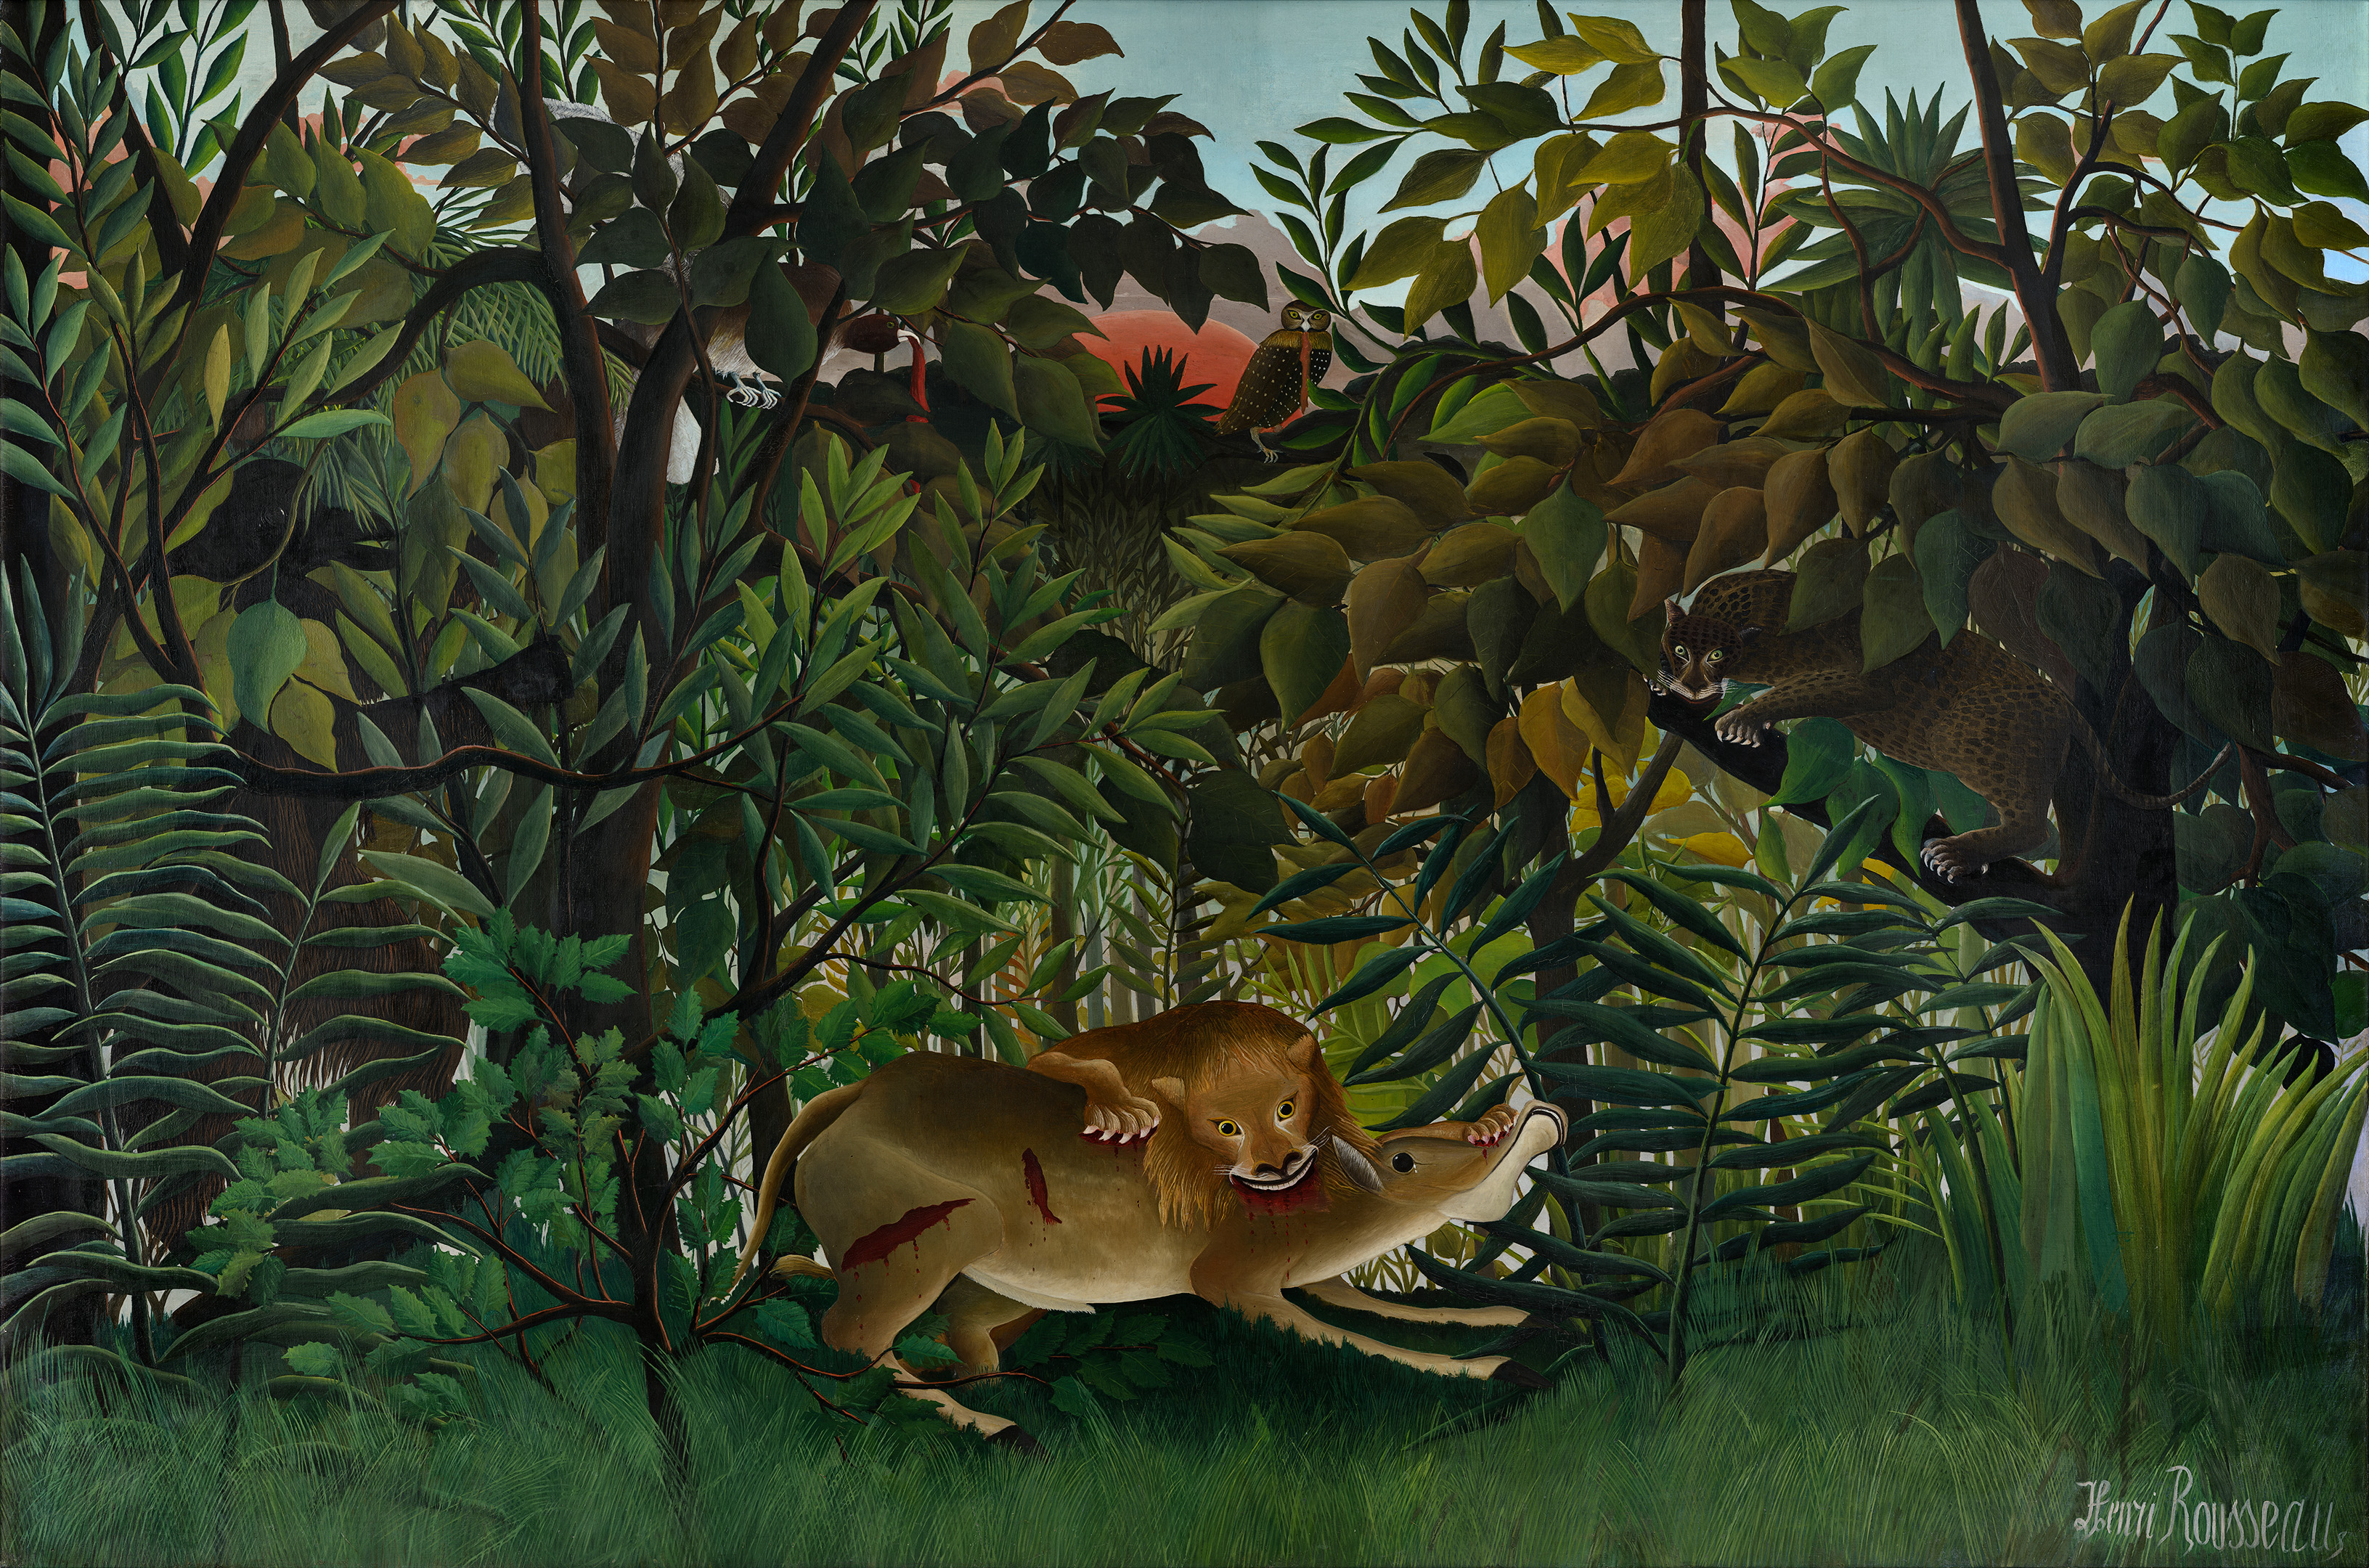 Henri Rousseau - The Hungry Lion Attacking An Antelope (1905) by Pieter Bruegel the Elder